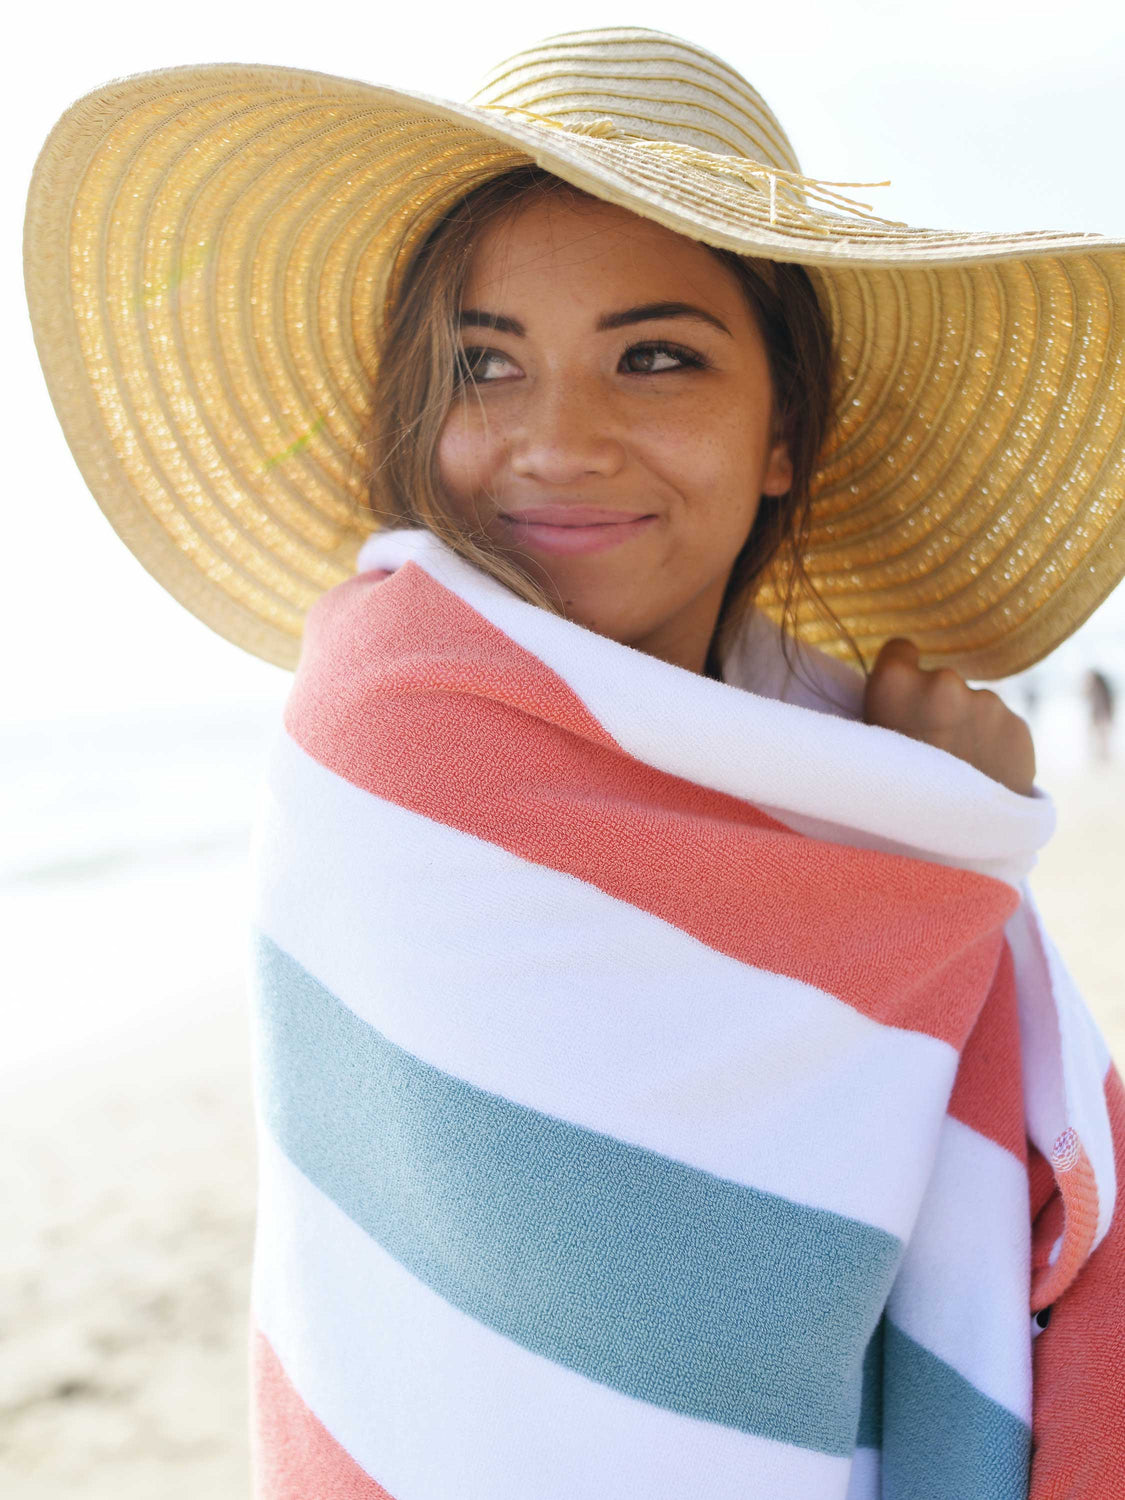 A close-up of a woman wrapped in an orange, green, and white striped cabana beach towel.